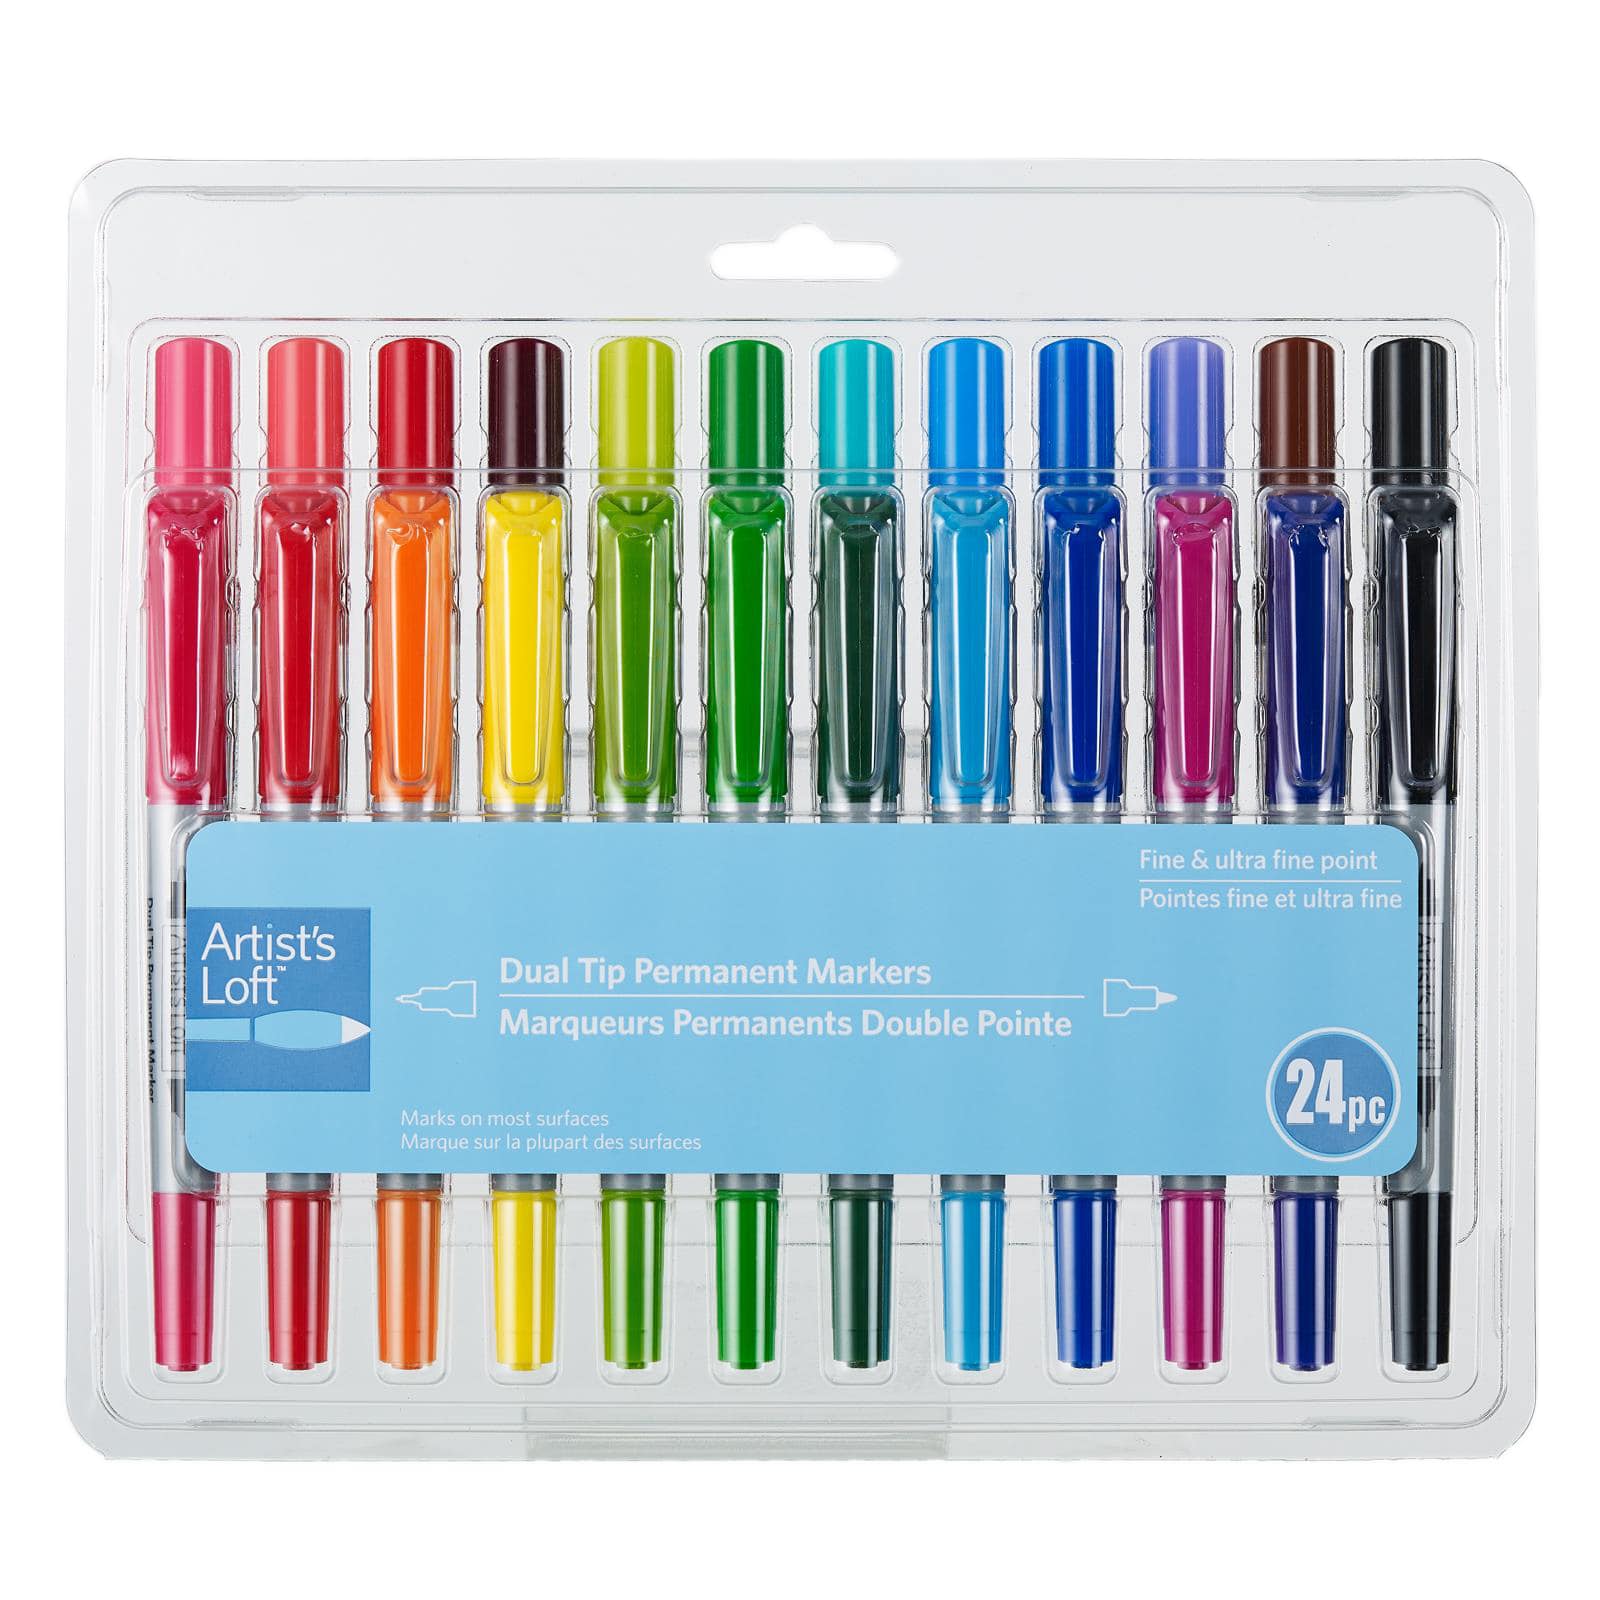  Sharpie Original Fine Tips Permanent Markers, 21 Assorted  Colors Including 2 Metallic And 2 Black Markers For Art, Projects, Posters,  Crafts Or Classroom Use